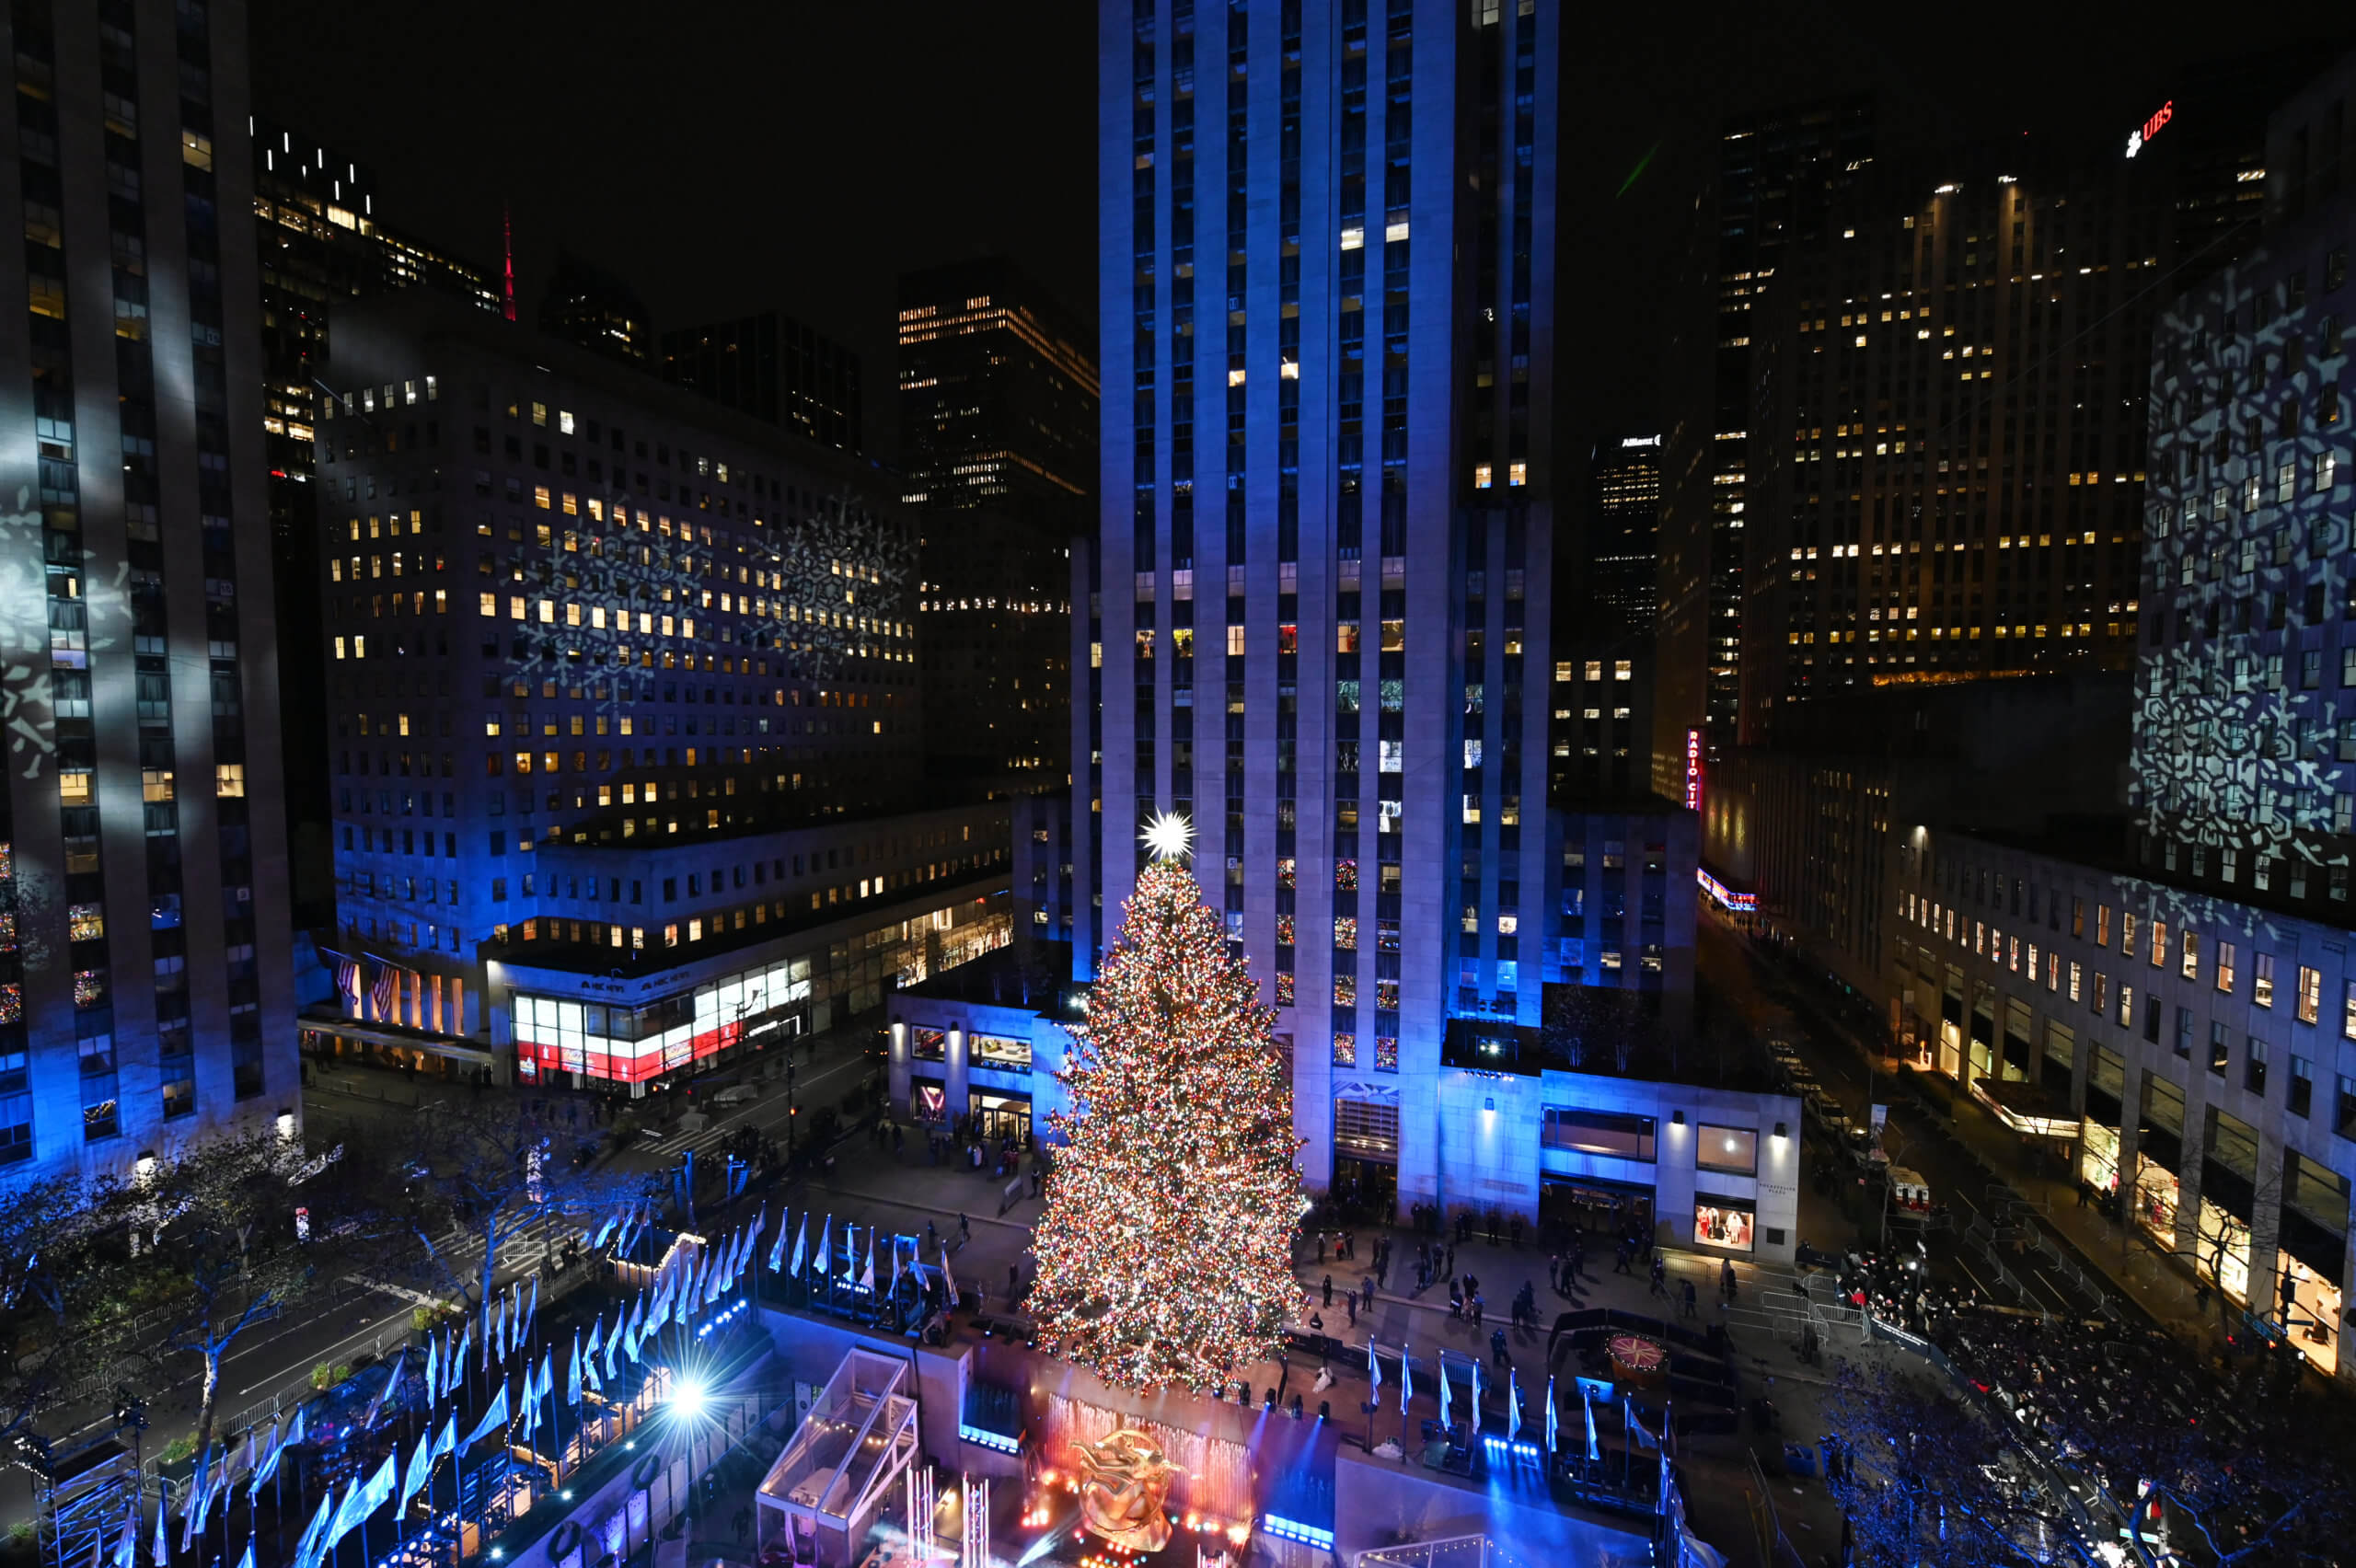 Rockefeller Center Tree Details About NYC's Iconic, 58 OFF